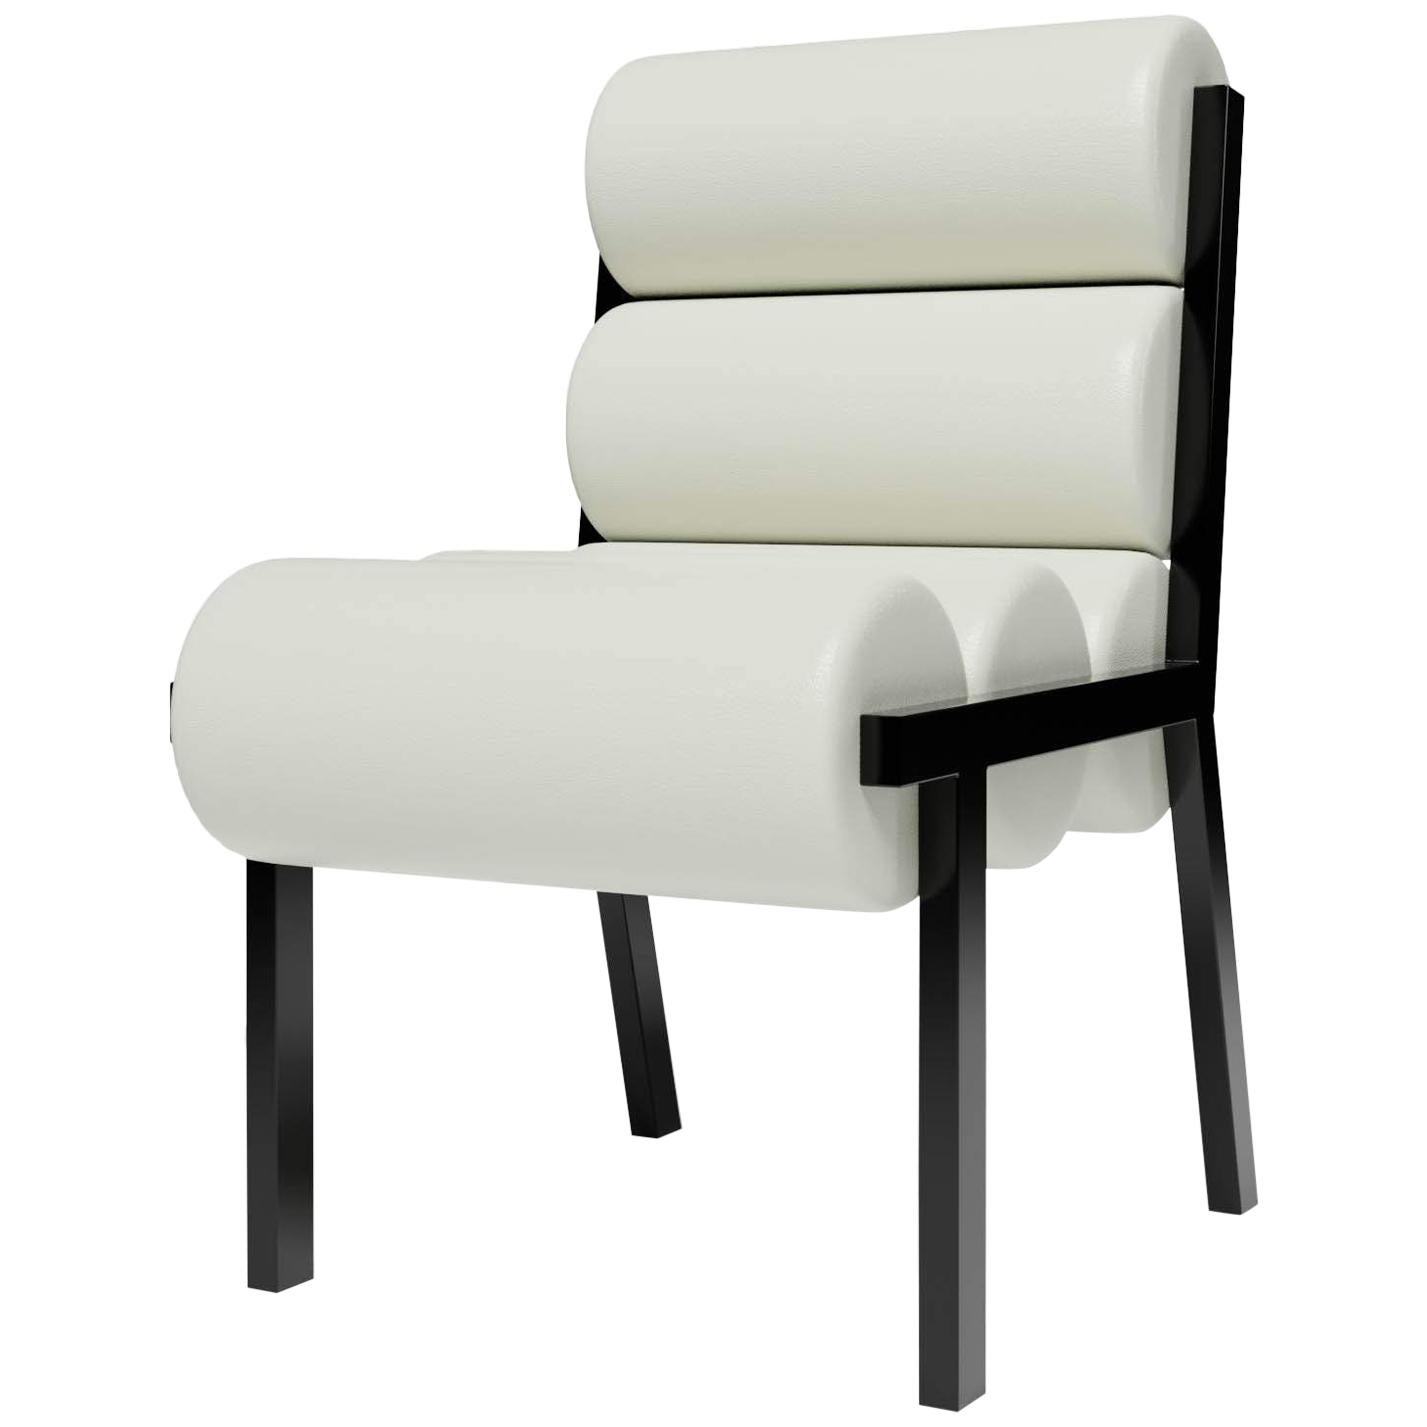 LIDO DINING CHAIR LOW - Modern Design in Leather with High Gloss Lacquer Legs